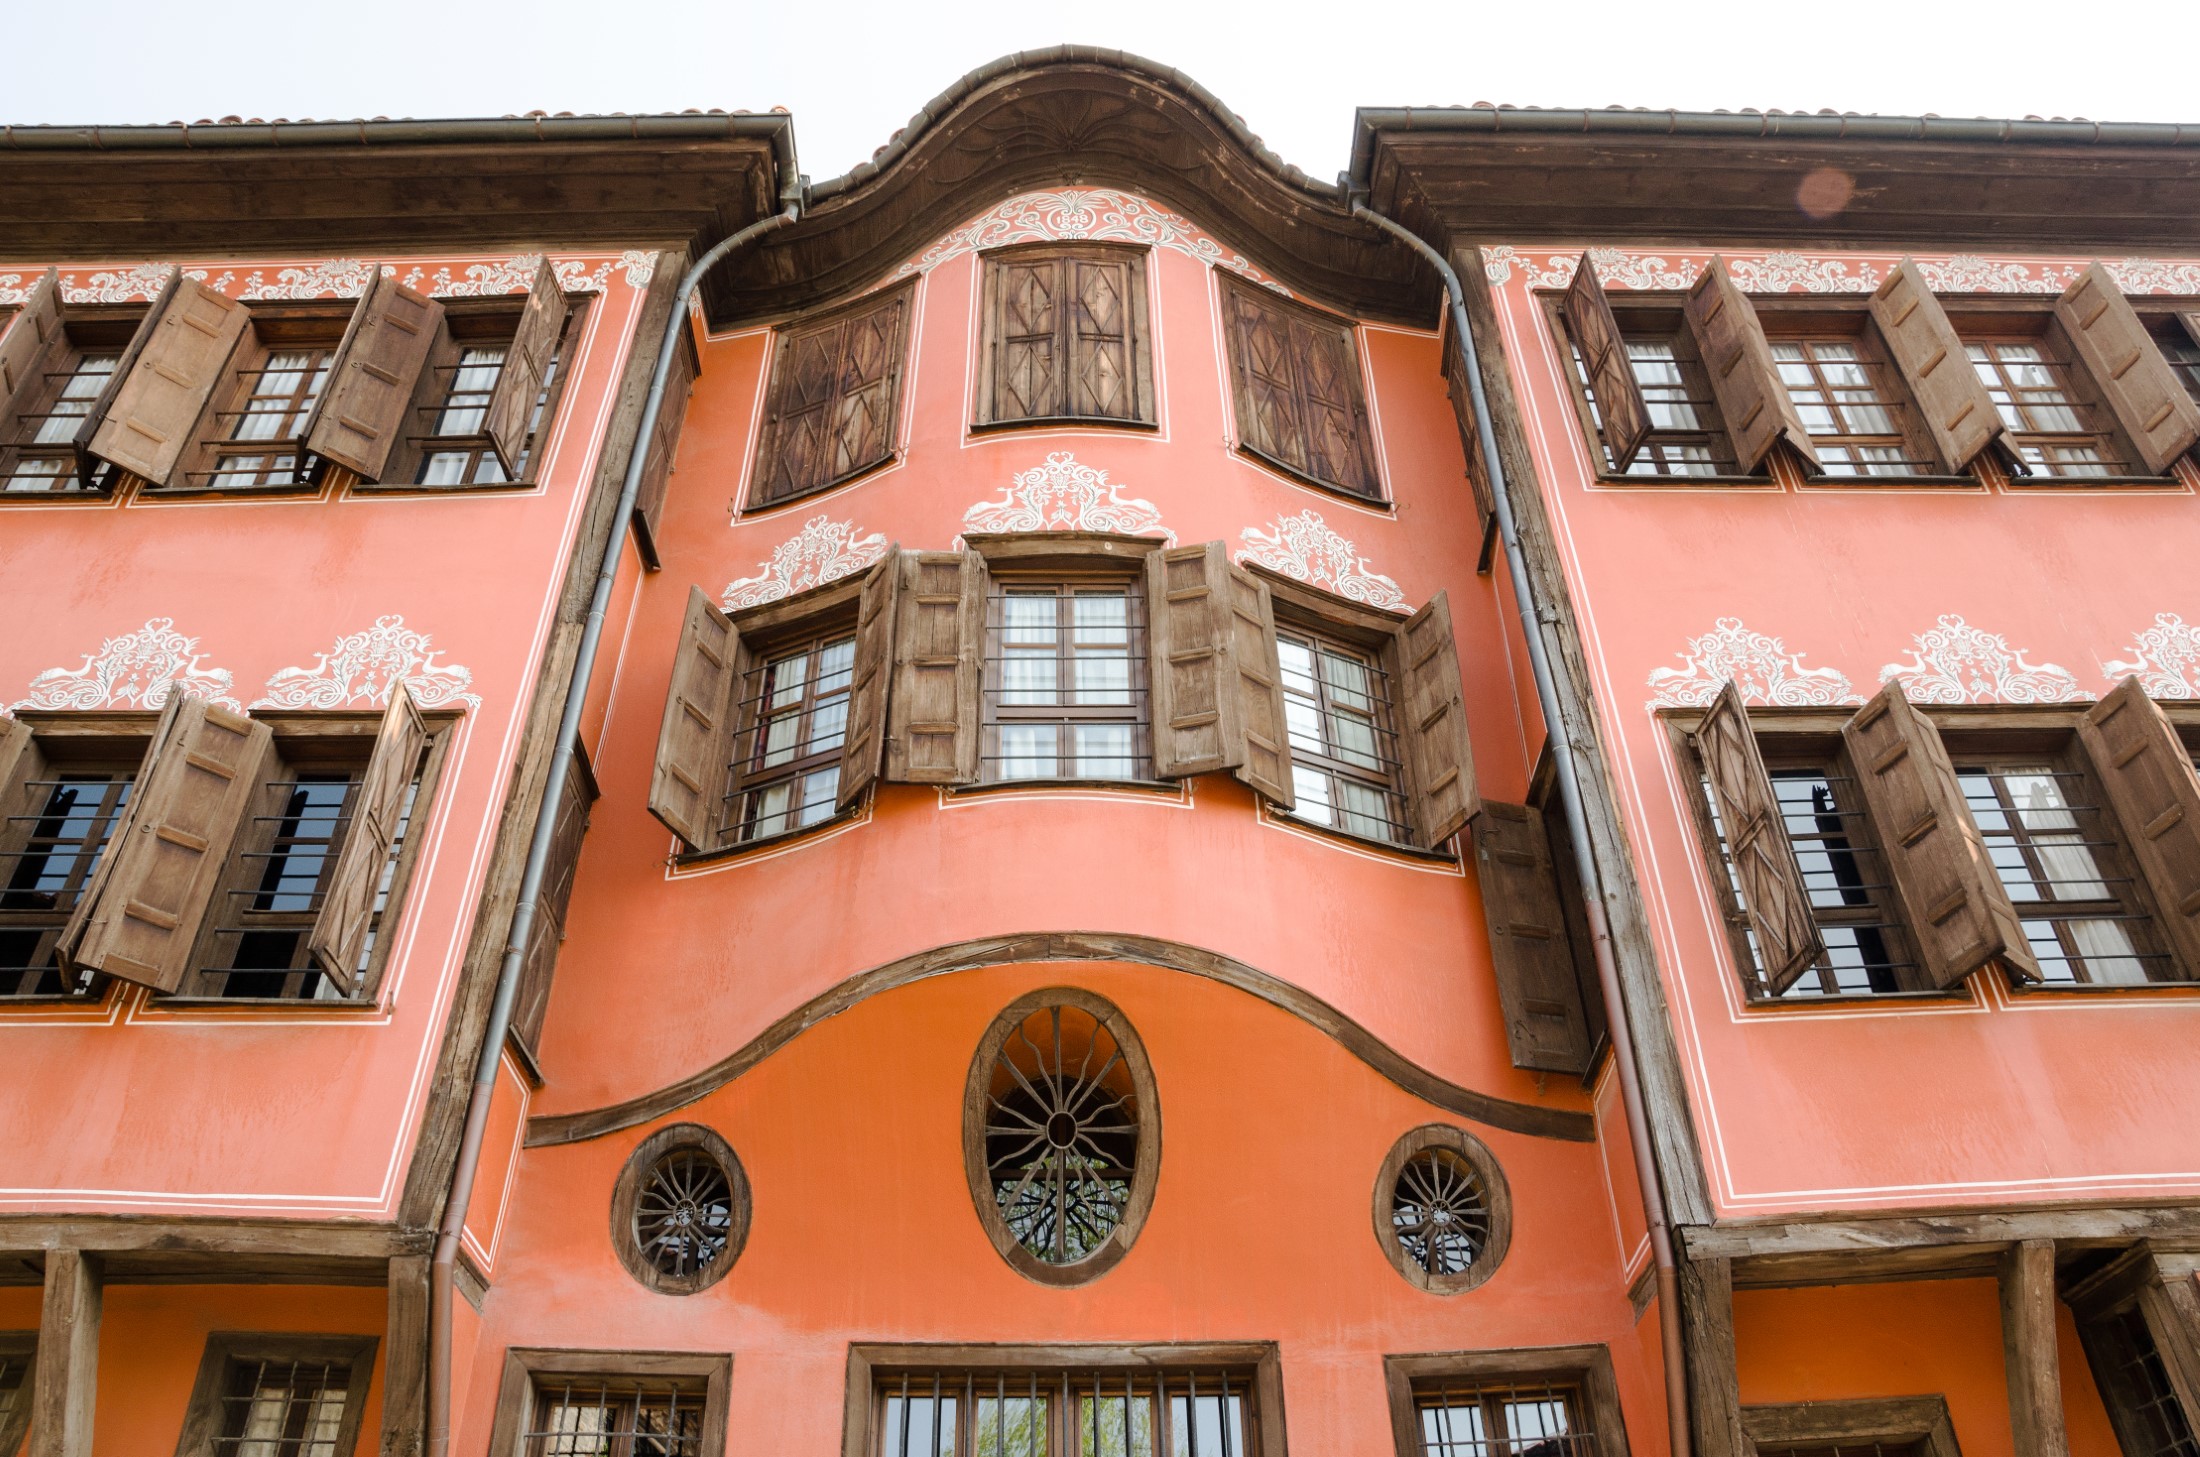 Typical architecture in Plovdiv, Bulgaria. Plovdiv is the Europe's Oldest Inhabited City. The Ancient Plovdiv is a part of UNESCO's World Heritage, it is a public place and is not subject to copyright